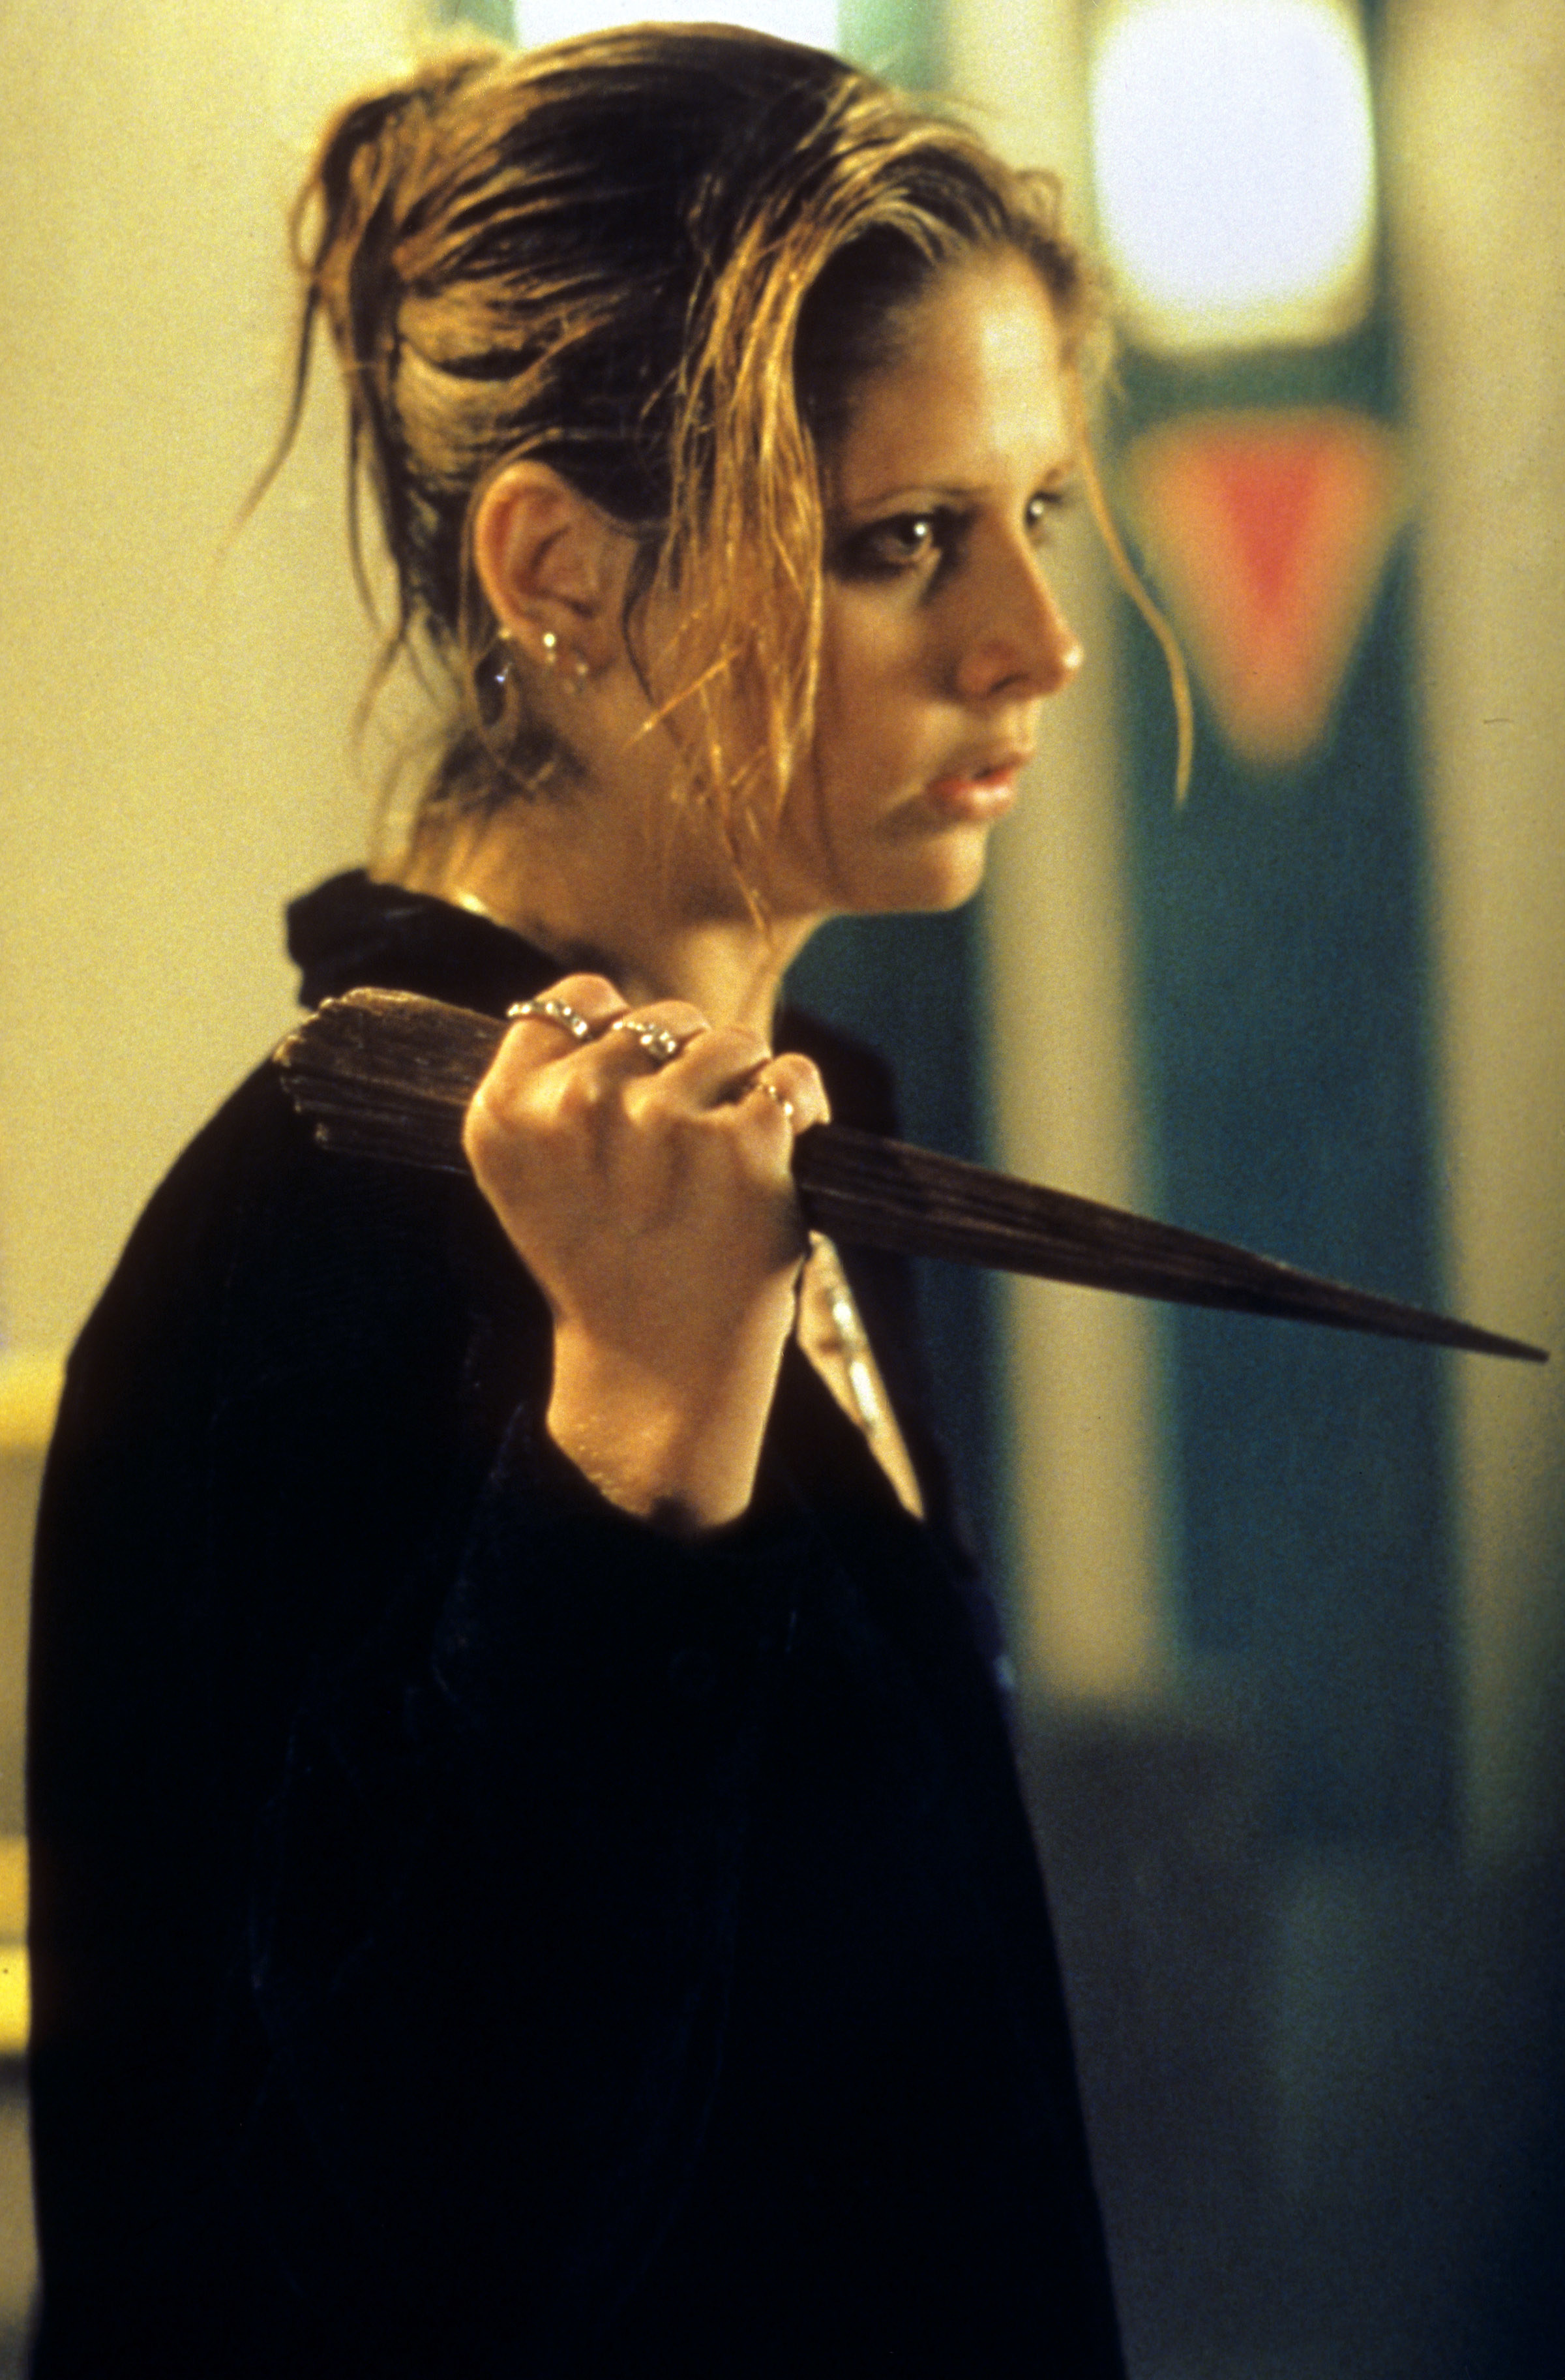 Buffy holding a wooden stake